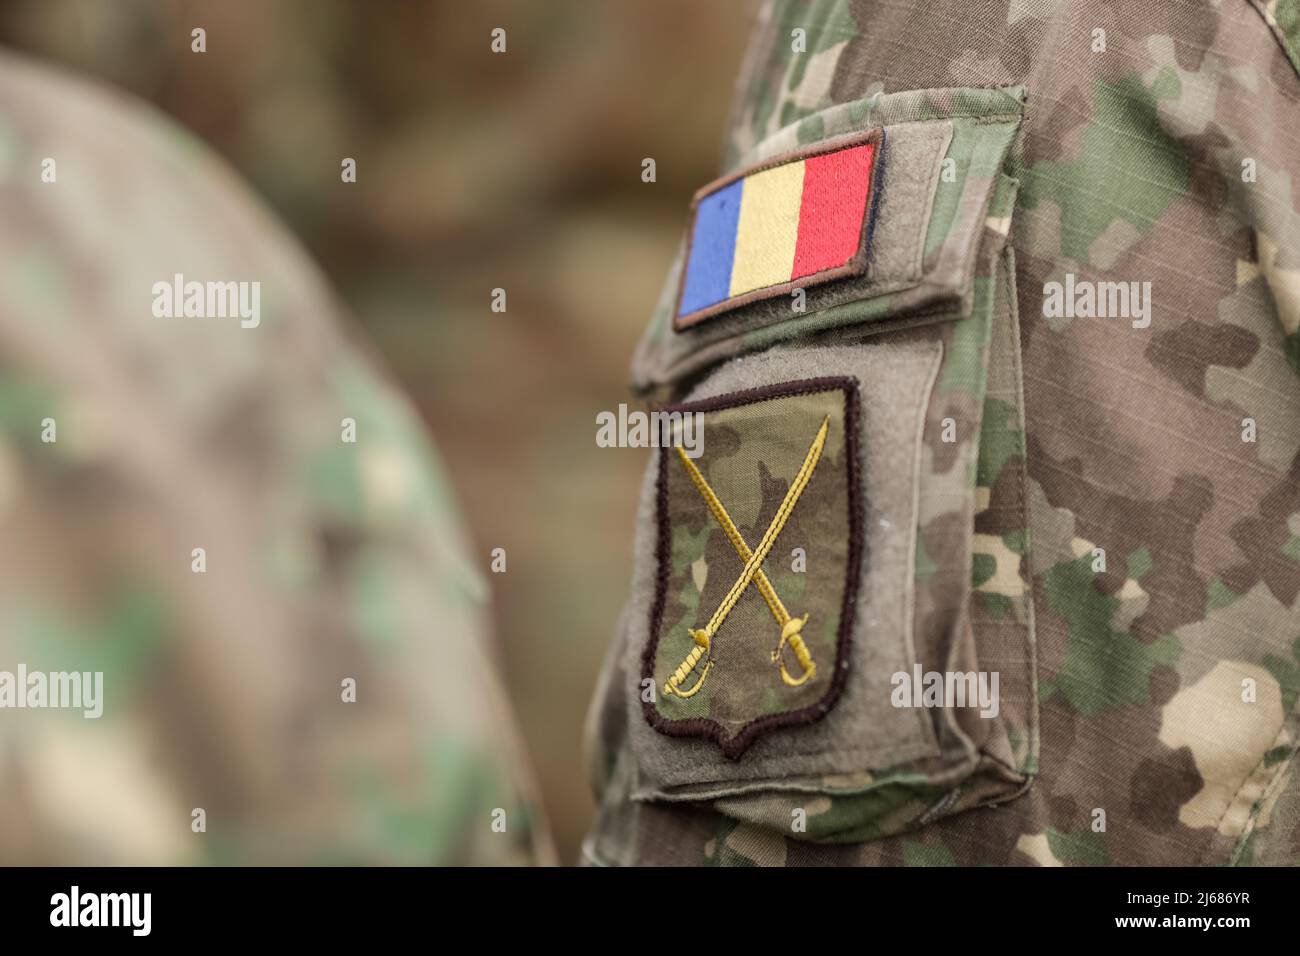 Bucharest, Romania - April 28, 2022: Shallow depth of field details with the Romanian Land Forces armband (brassard, armlet). Stock Photo